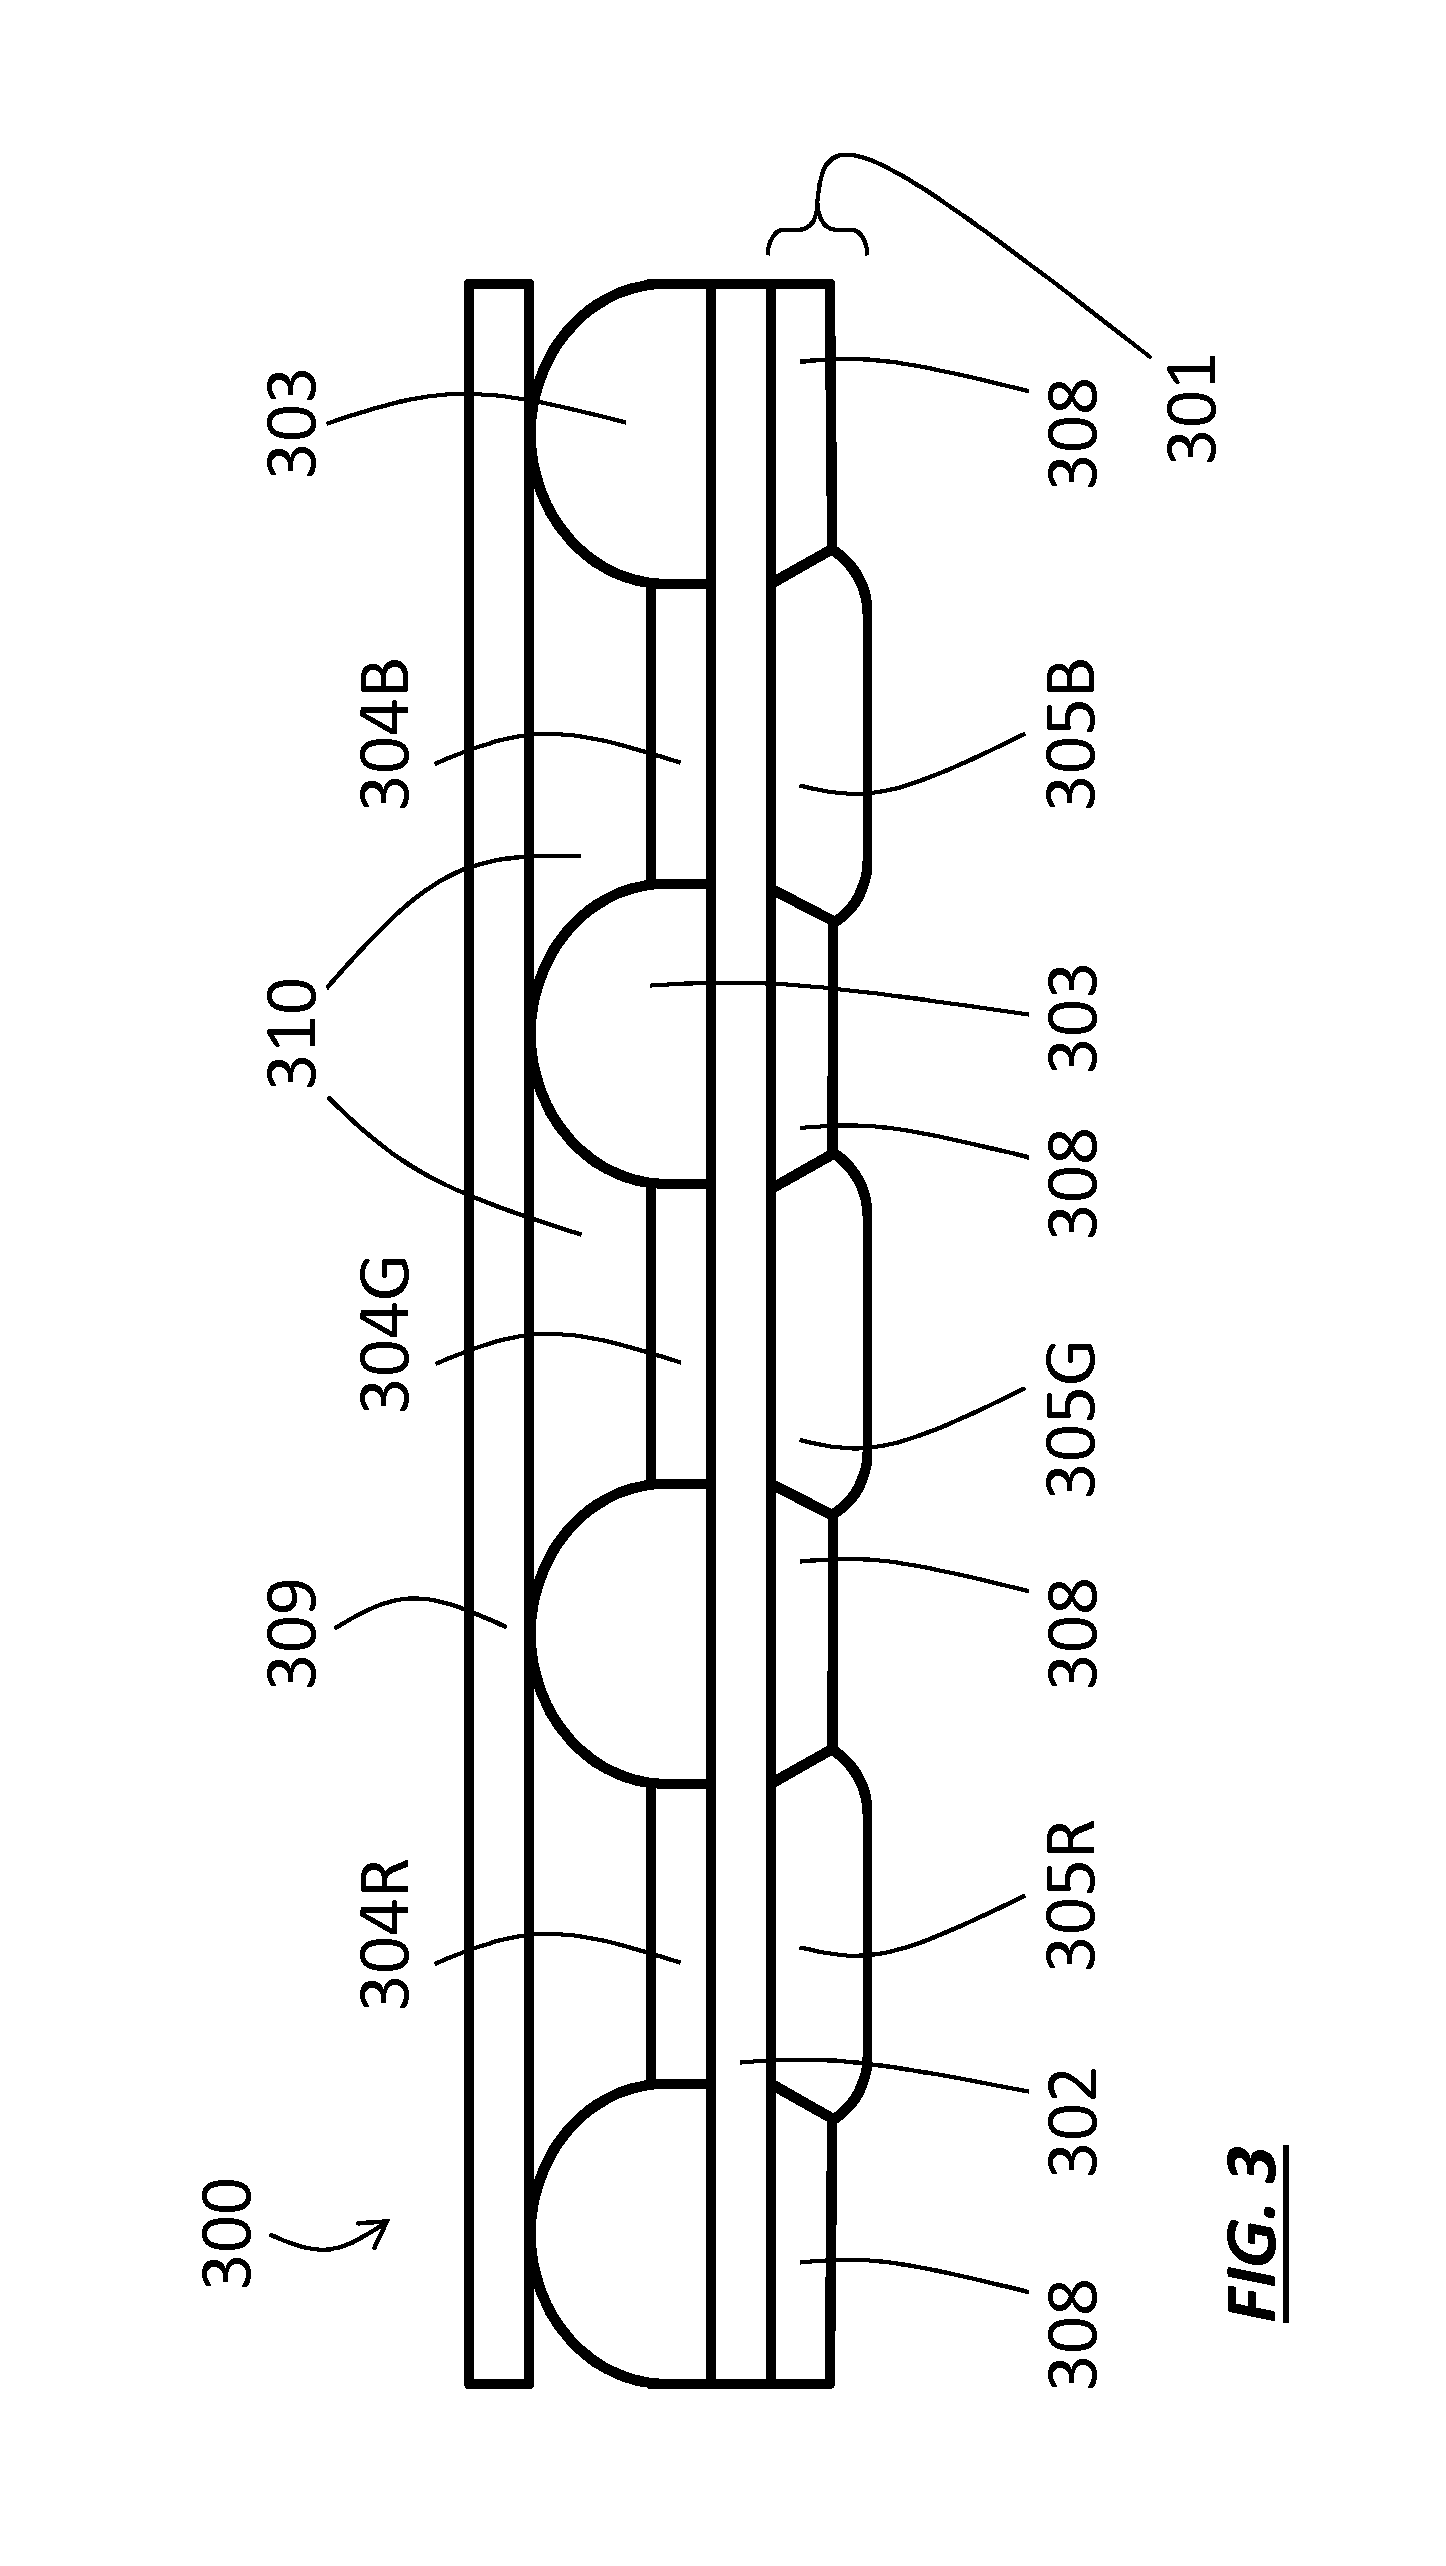 Local seal for encapsulation of electro-optical element on a flexible substrate